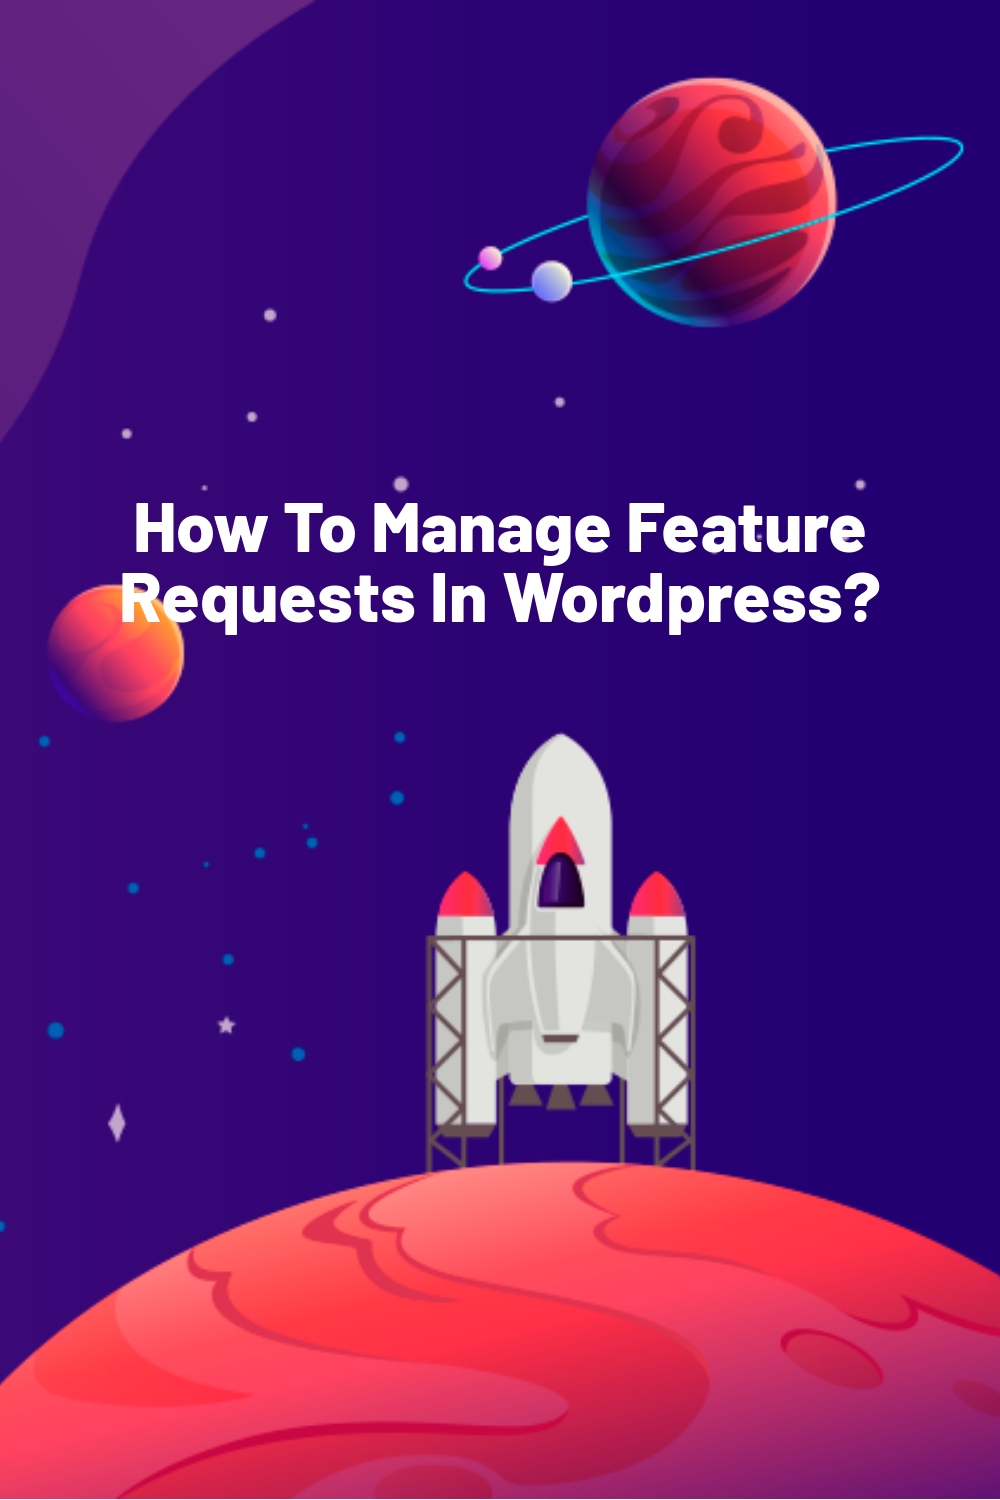 How To Manage Feature Requests In WordPress?